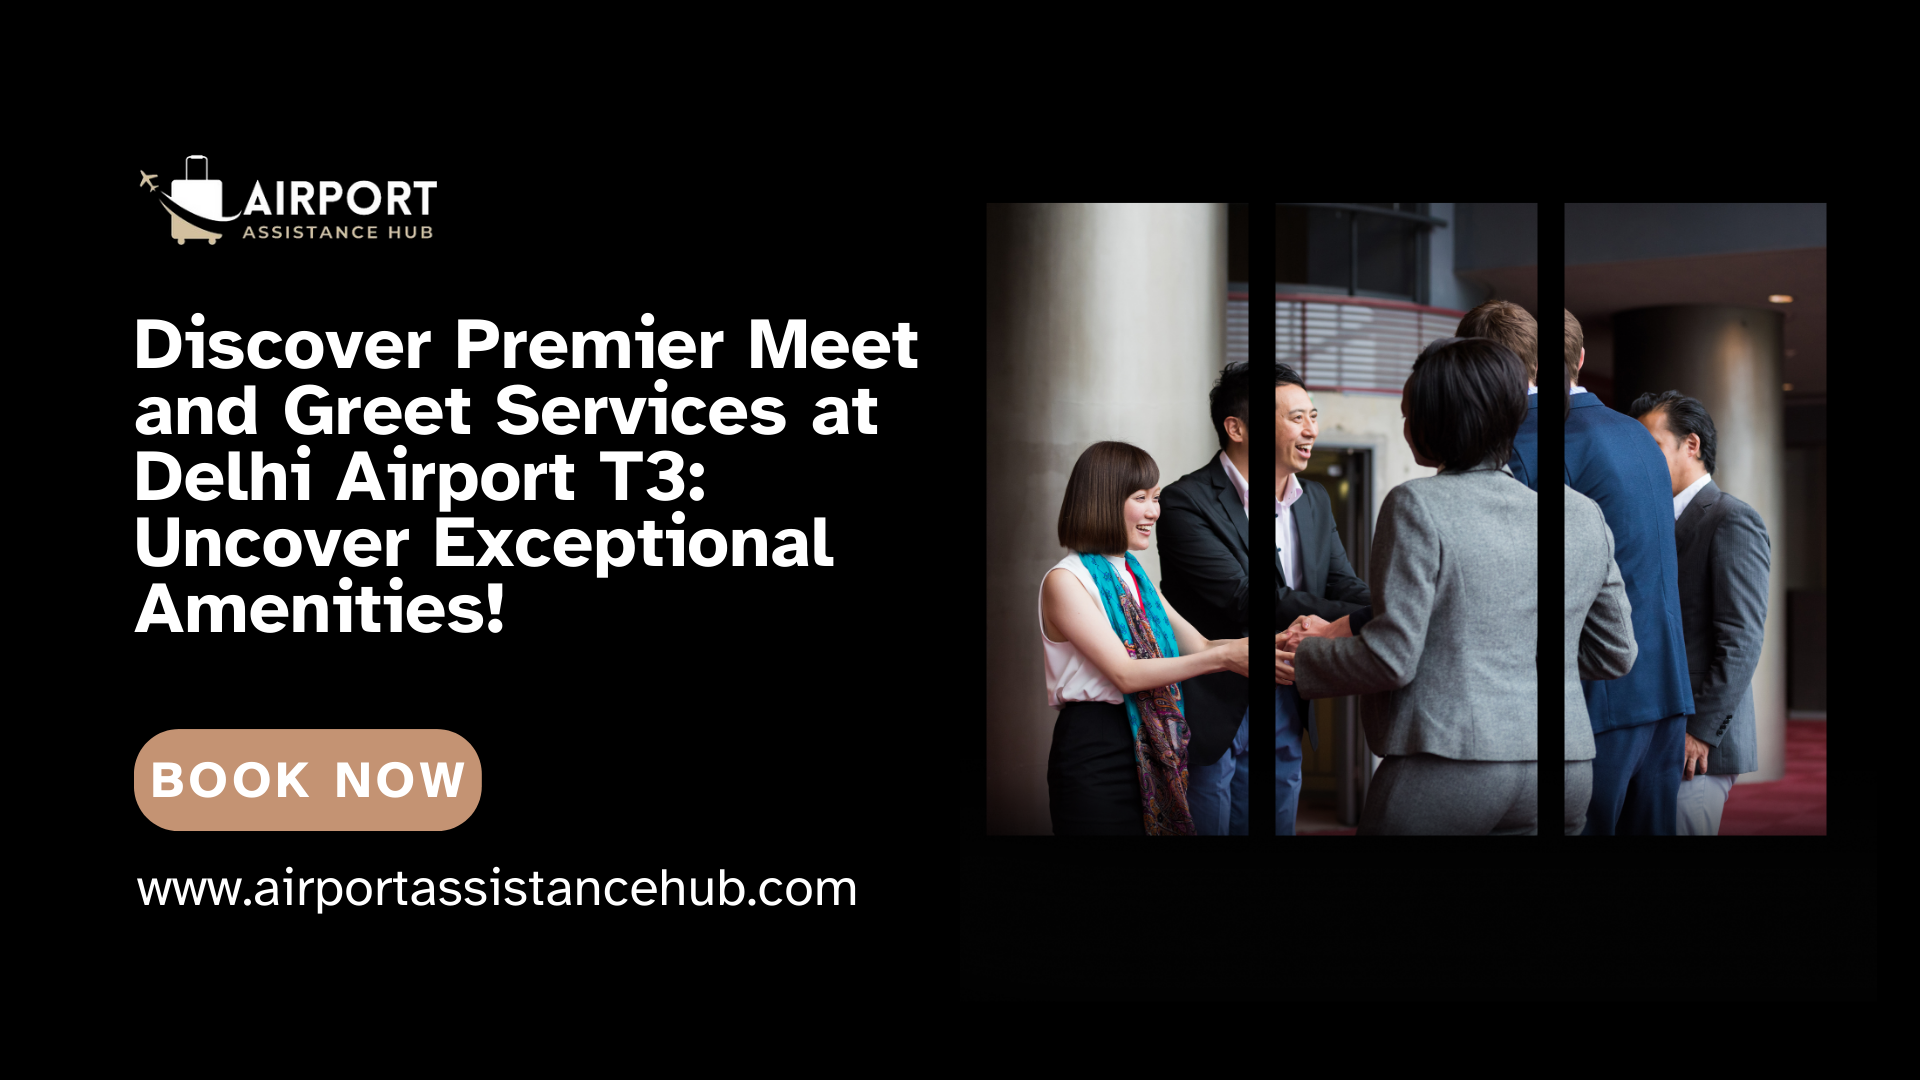 Discover Premier Meet and Greet Services at Delhi Airport T3: Uncover Exceptional Amenities!